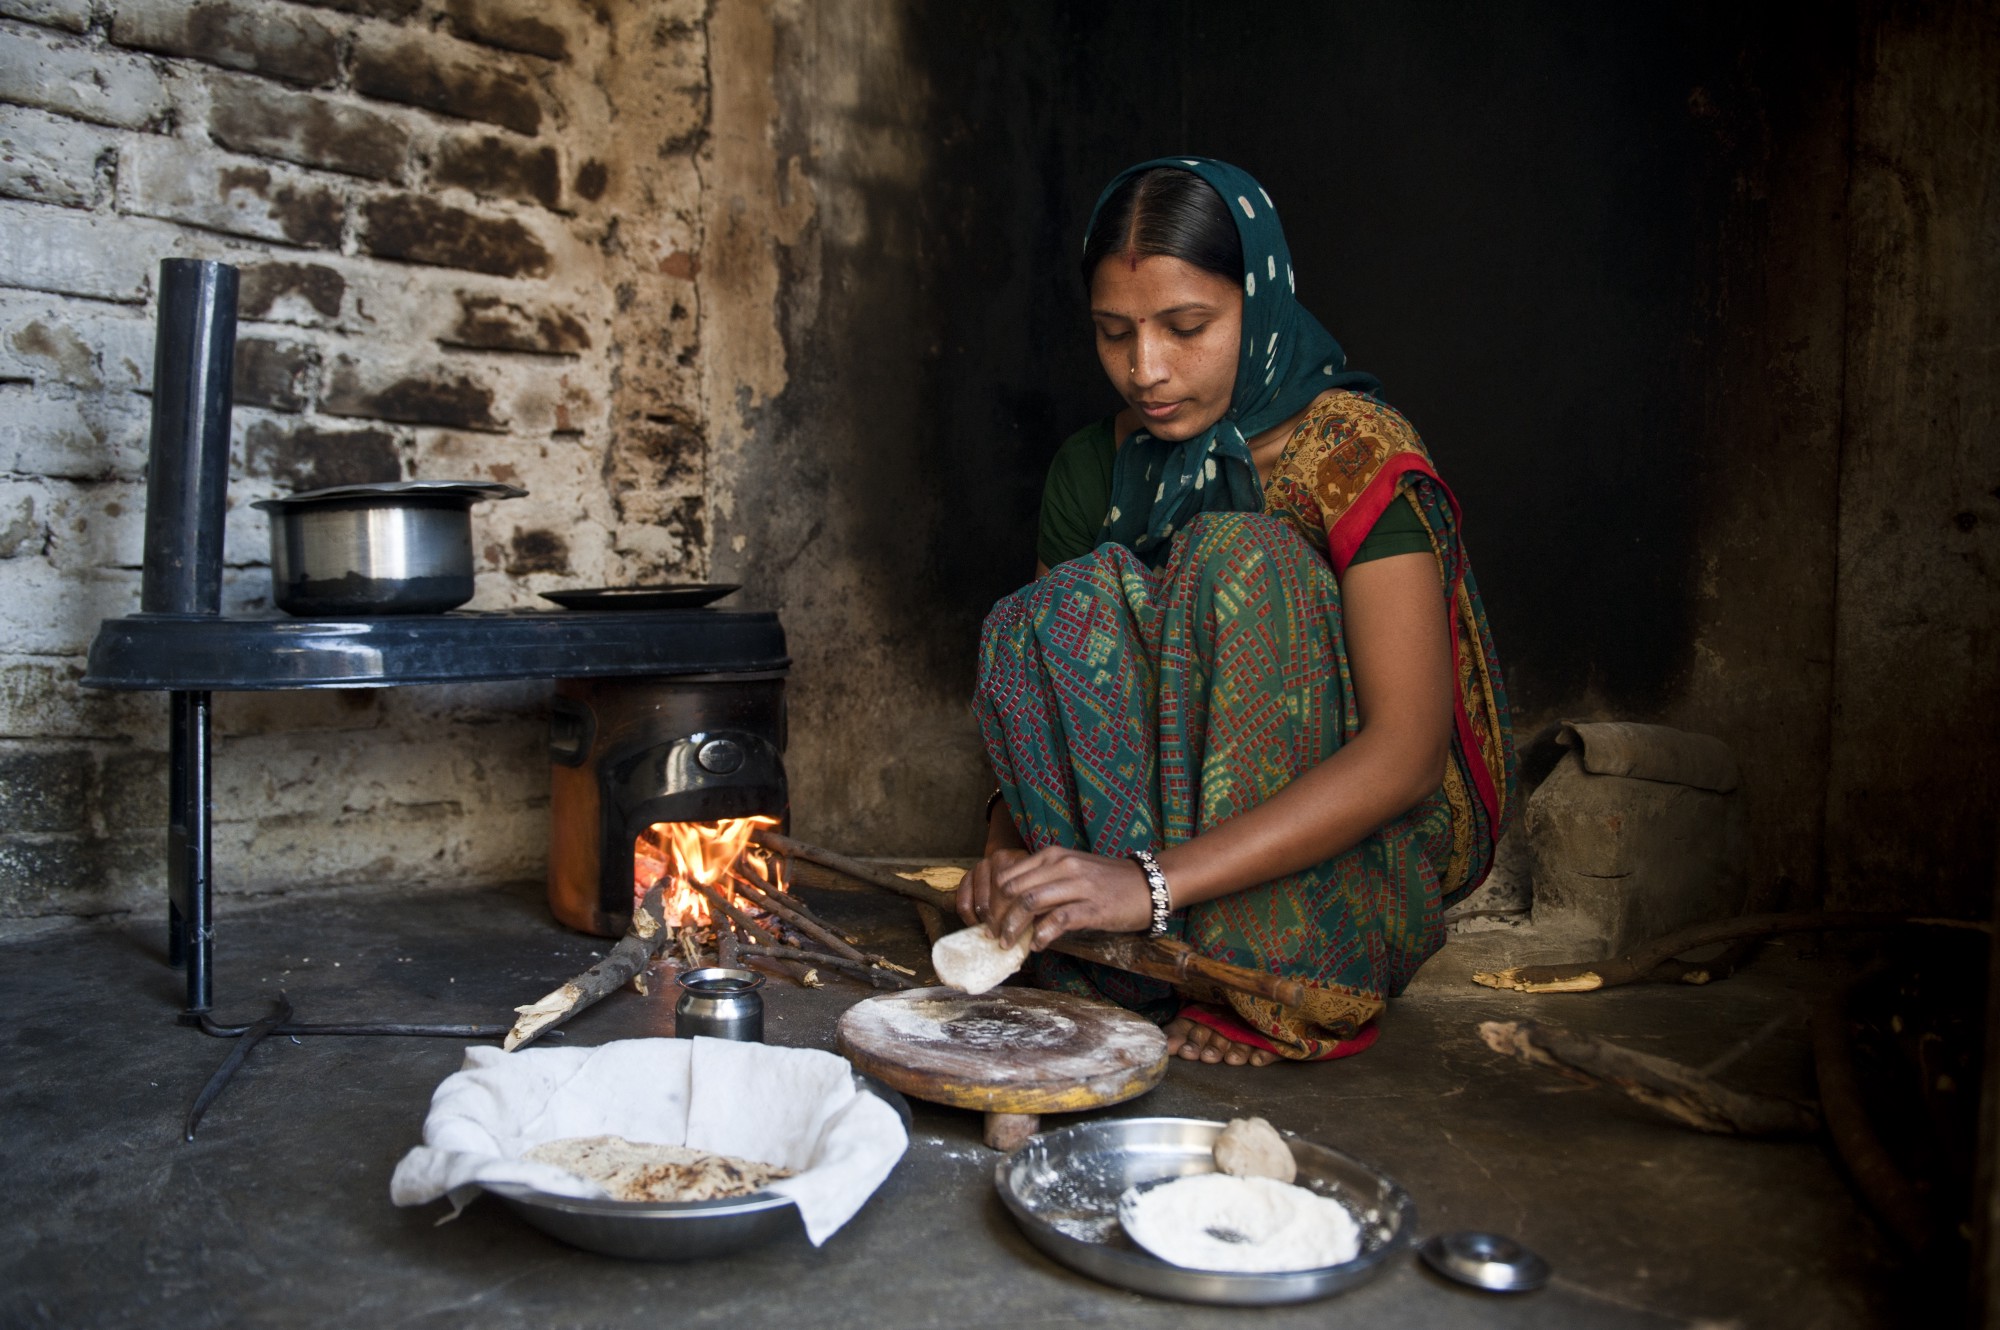 Cooking over an open flame in India